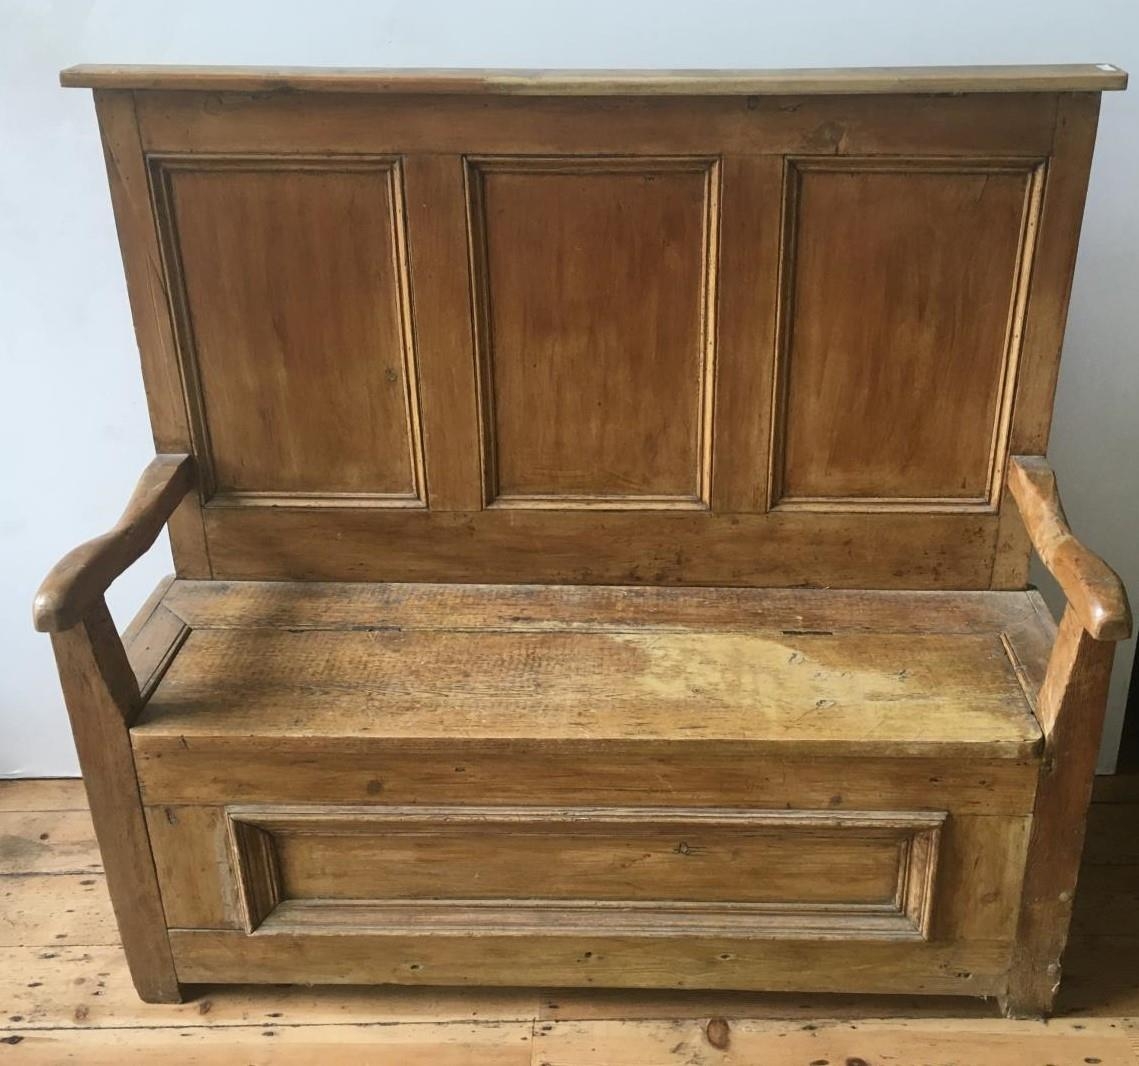 19th CENTURY WAXED PINE PANELLED SETTLE, with lift top seat with storage below 136 x 150 x 53cm - Image 2 of 2